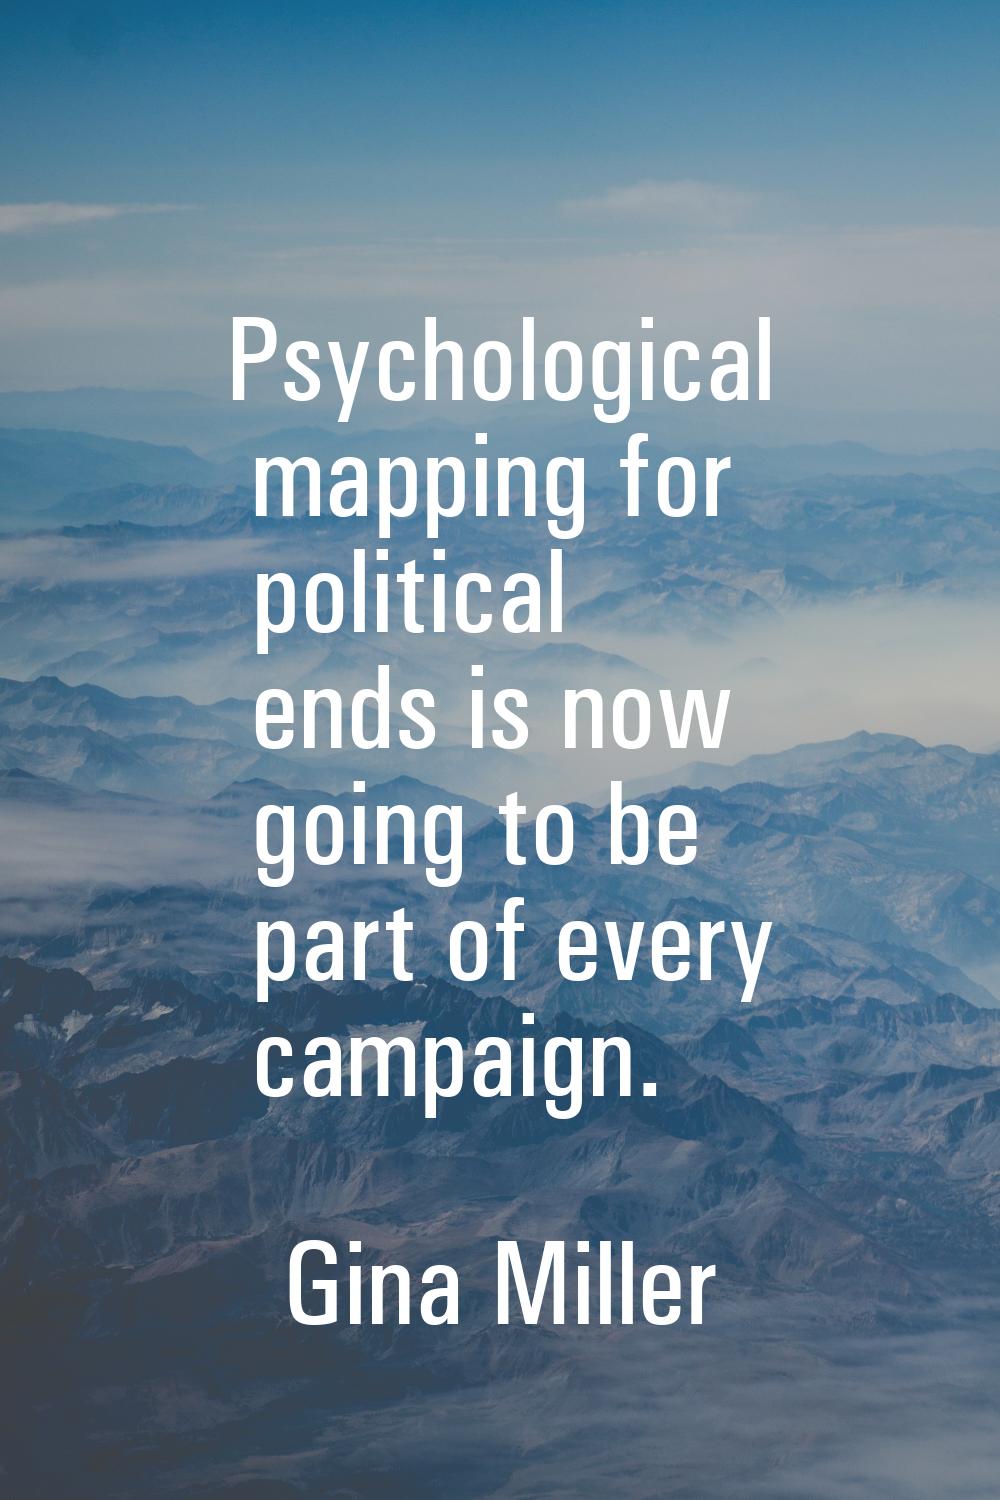 Psychological mapping for political ends is now going to be part of every campaign.